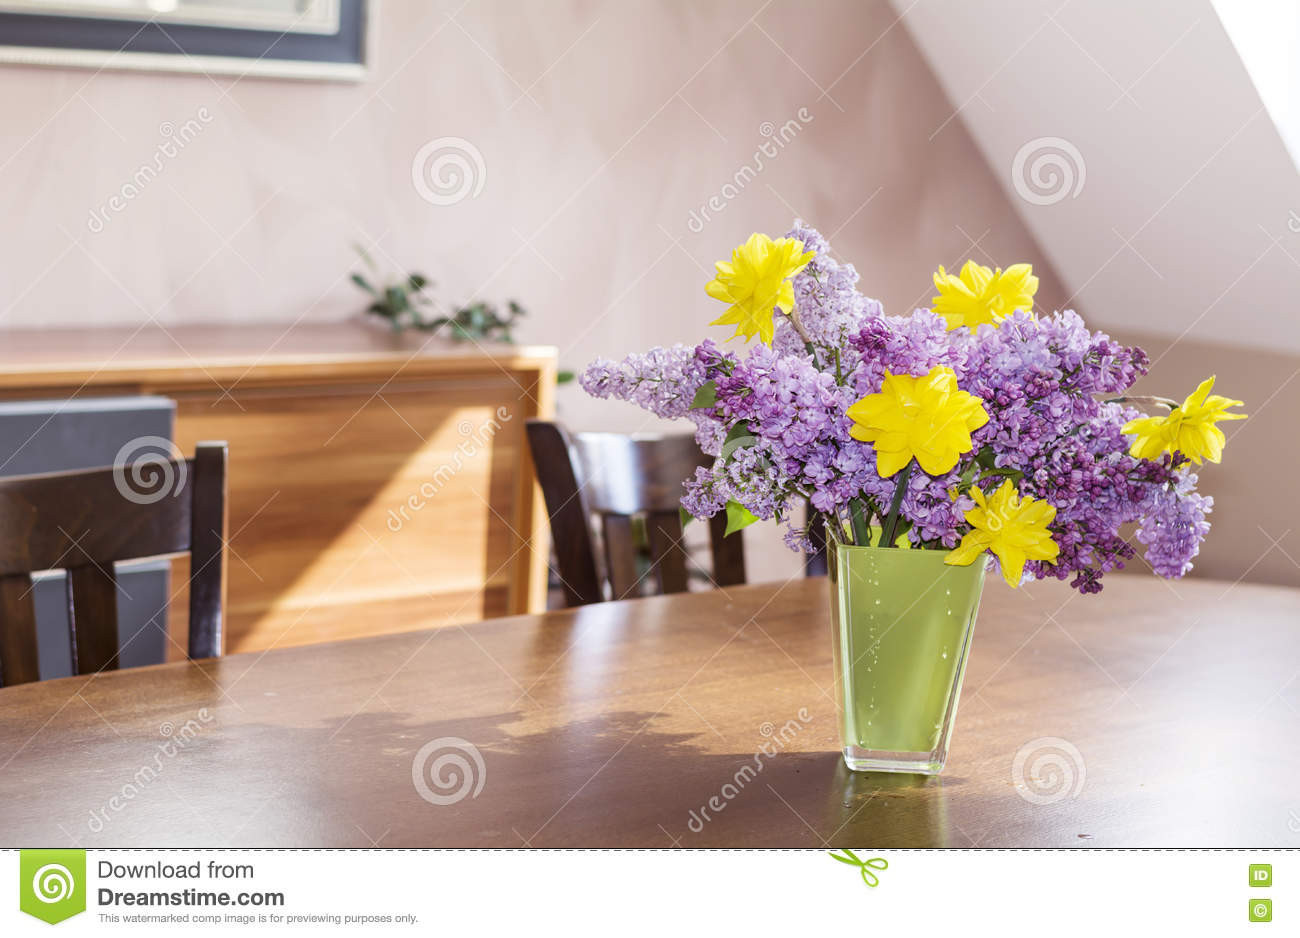 14 Amazing Test Tube Vase with Stand 2024 free download test tube vase with stand of wood and glass vase photograph yellow narcissus flowers and lilac in inside wood and glass vase photograph yellow narcissus flowers and lilac in a green glass va